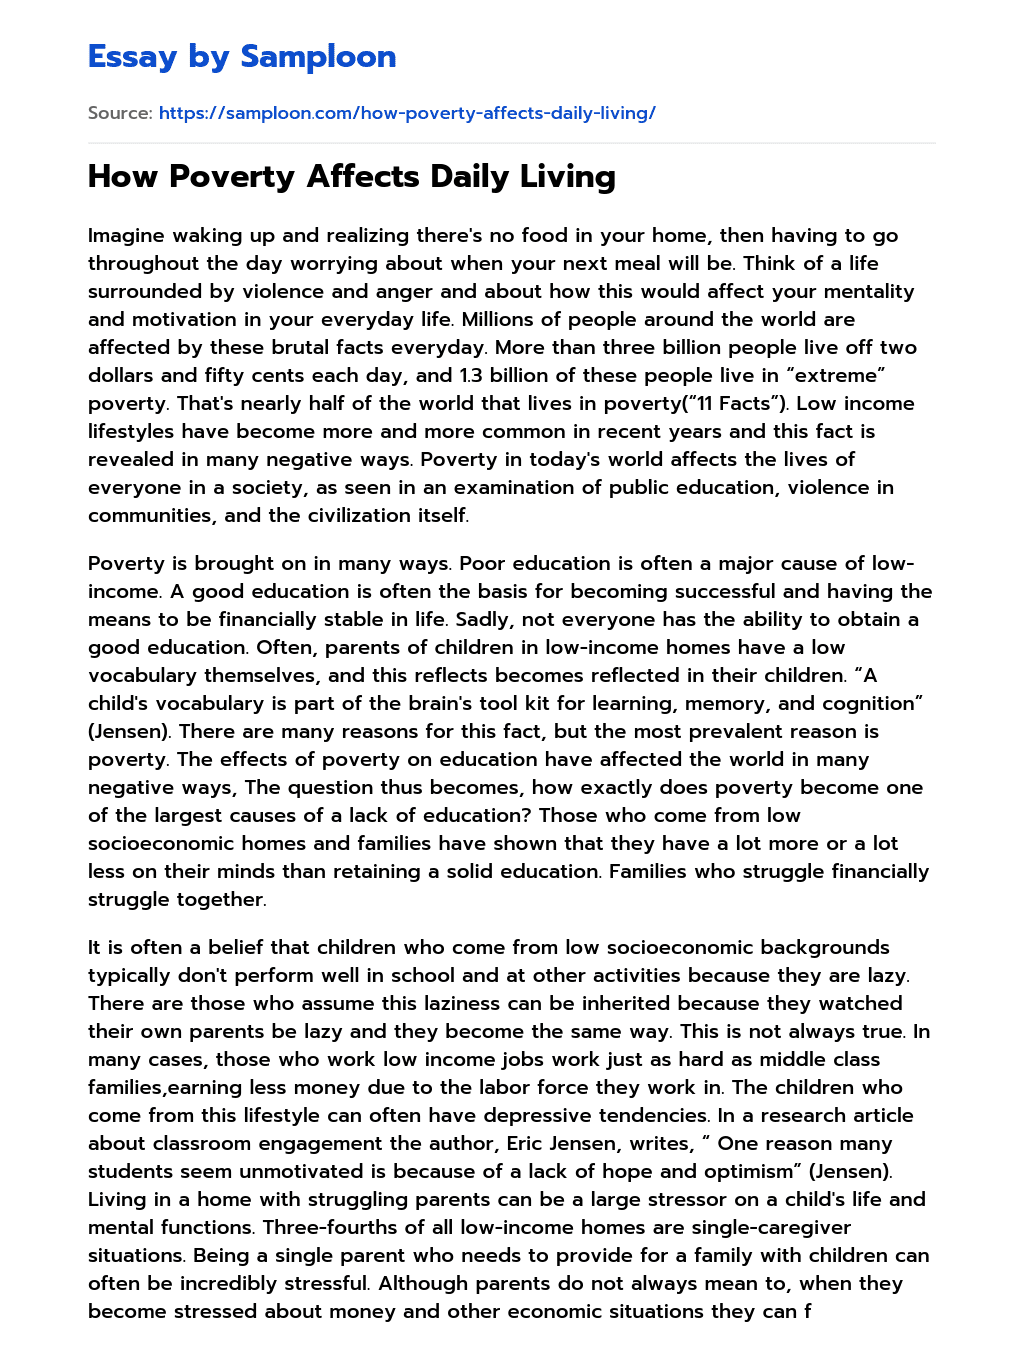 How Poverty Affects Daily Living essay